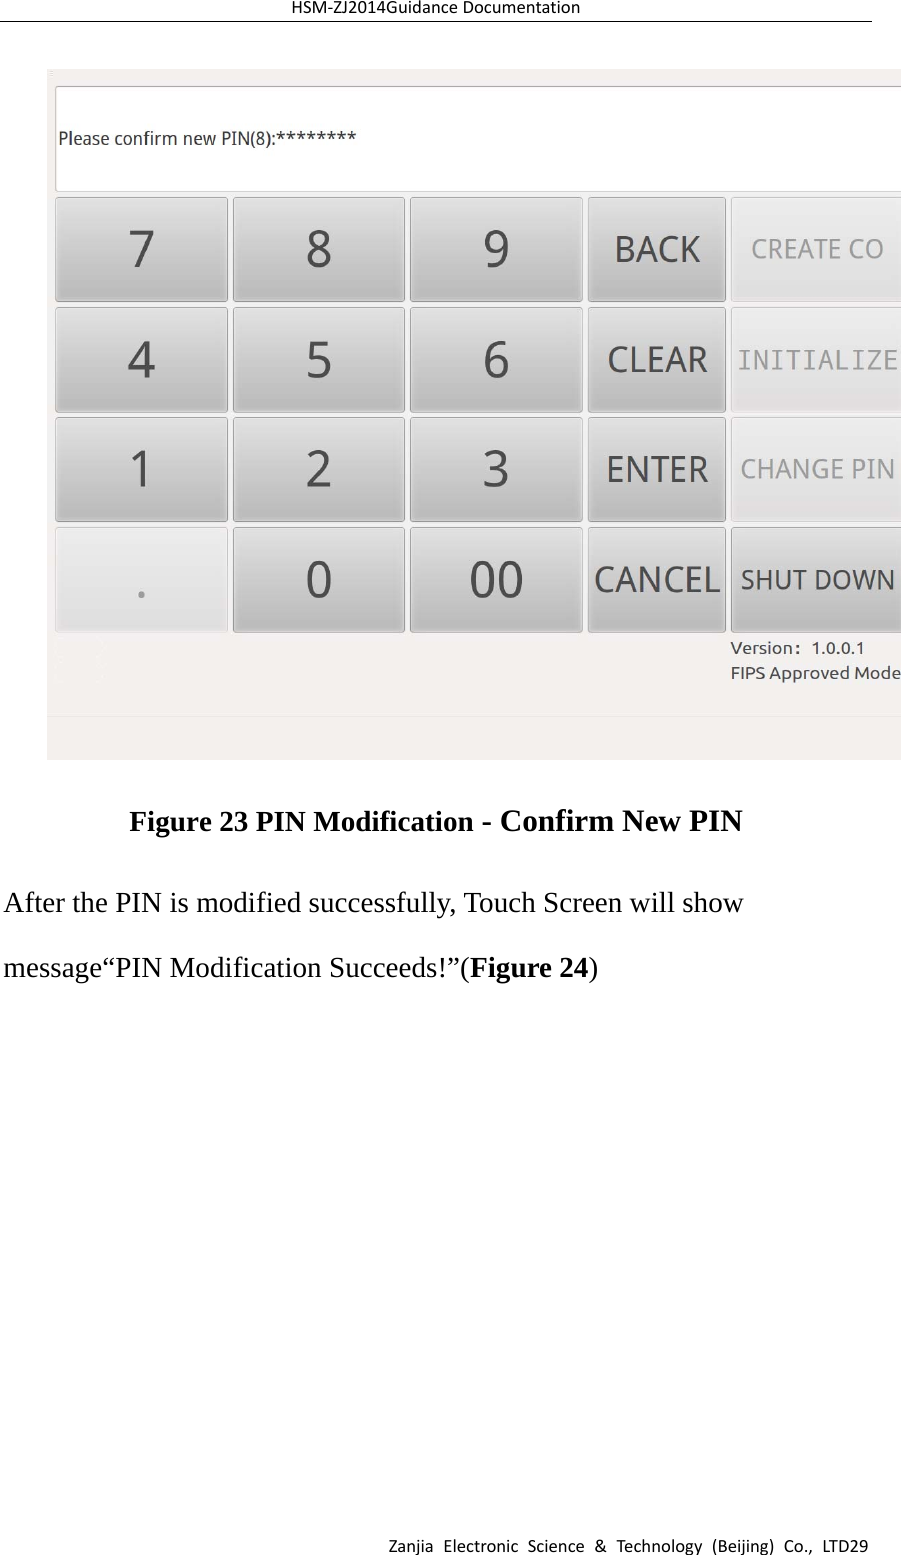 HSM‐ZJ2014GuidanceDocumentationZanjiaElectronicScience&amp;Technology(Beijing)Co.,LTD29 Figure 23 PIN Modification - Confirm New PIN After the PIN is modified successfully, Touch Screen will show message“PIN Modification Succeeds!”(Figure 24) 